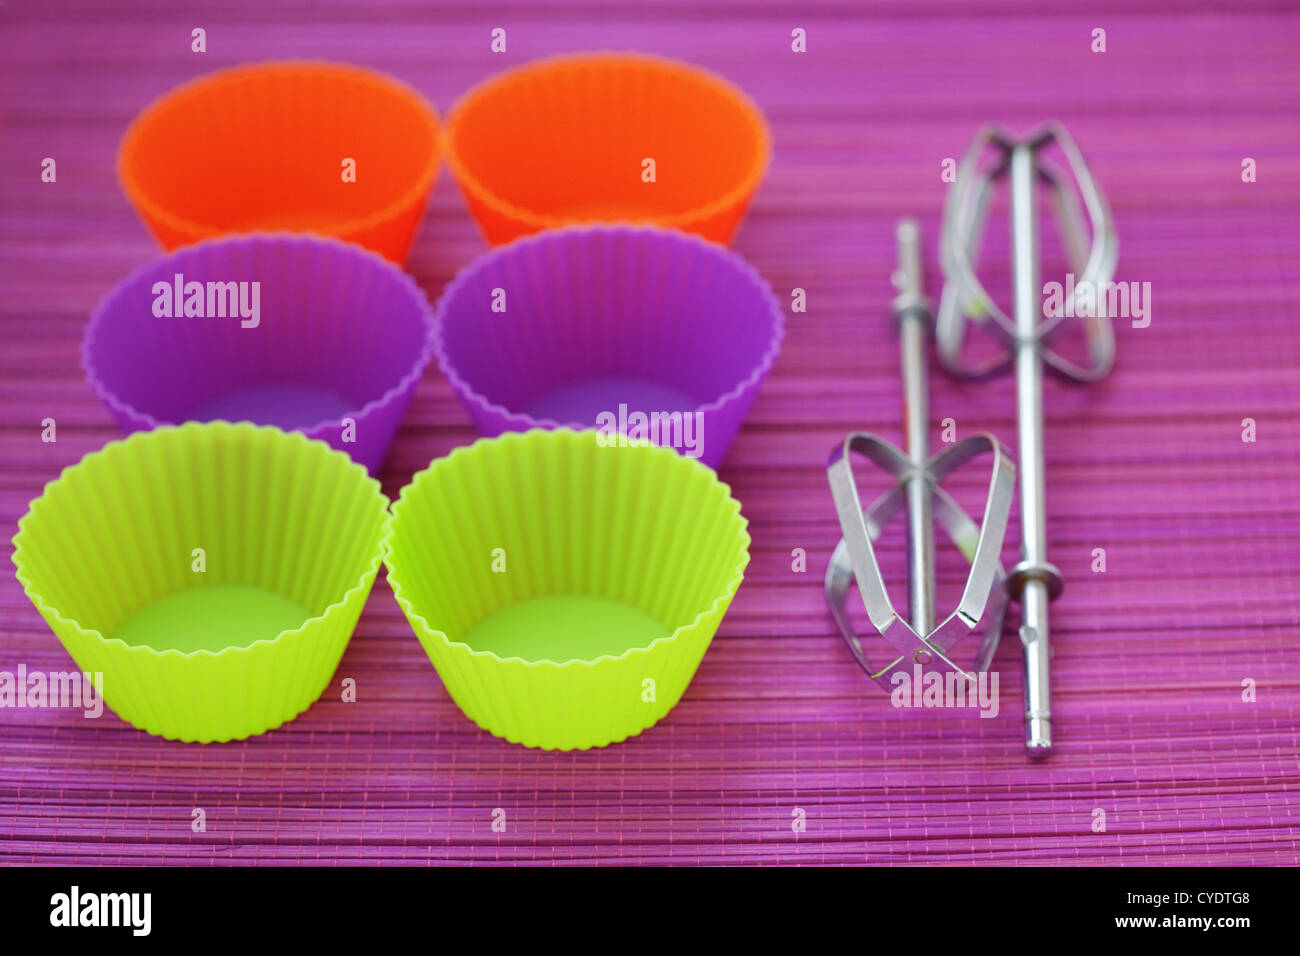 Colorful silicone baking cups on purple background Stock Photo